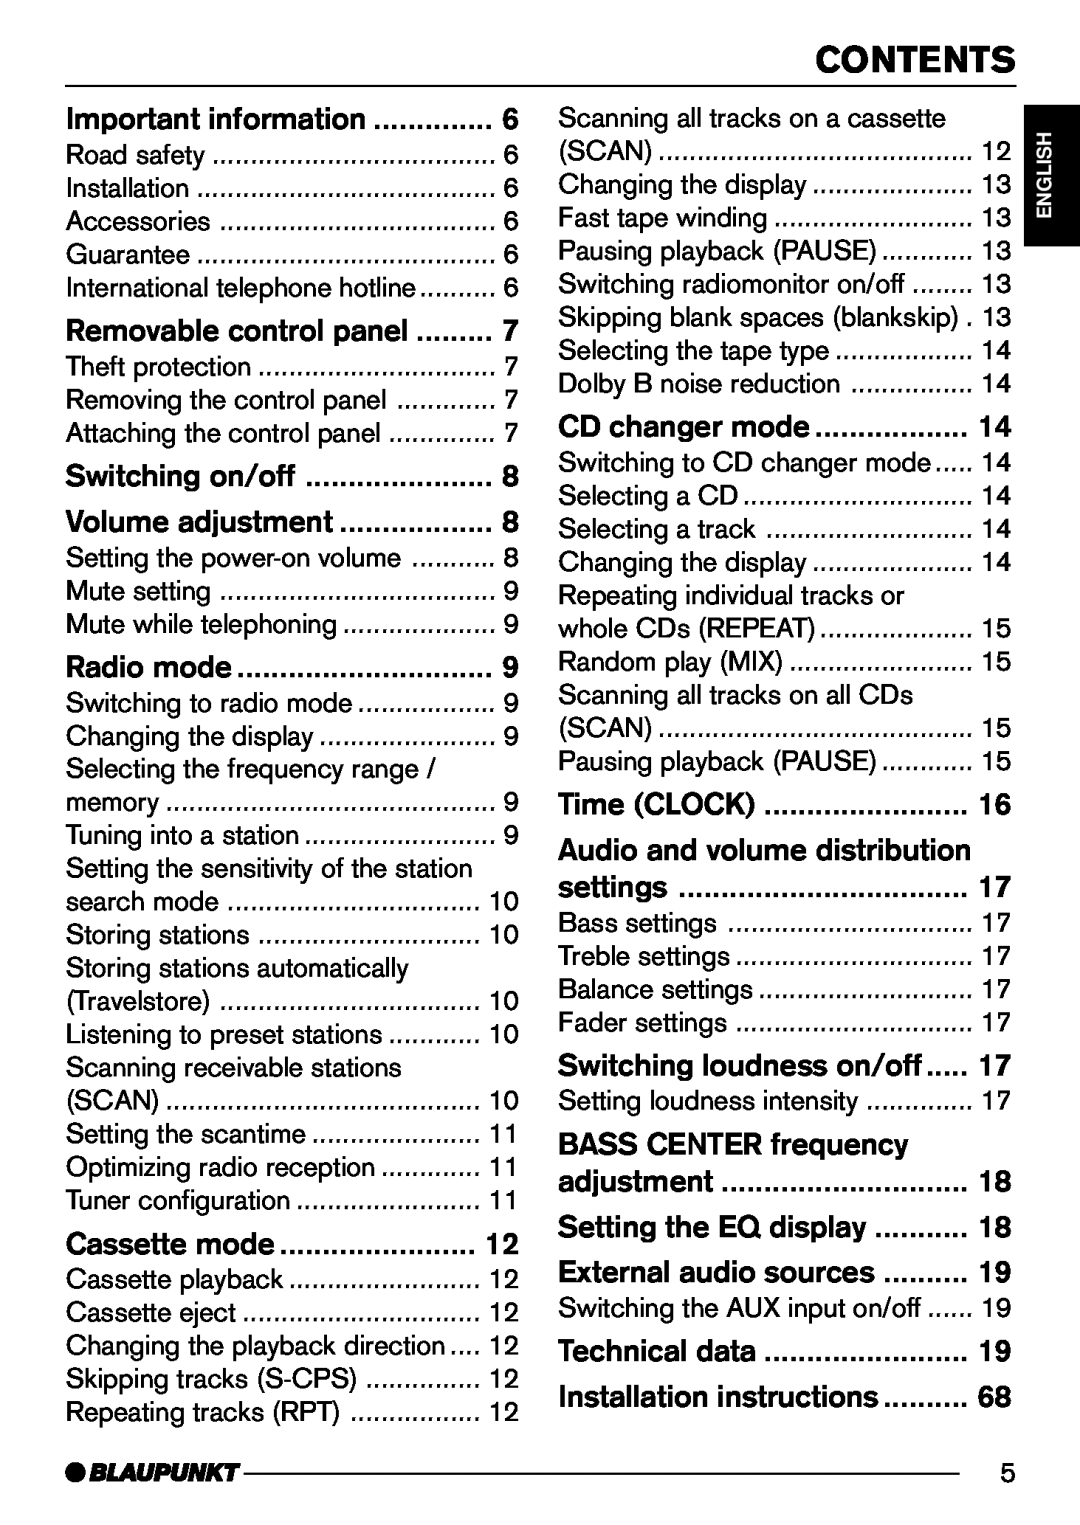 Blaupunkt C50 operating instructions Contents, BASS CENTER frequency 